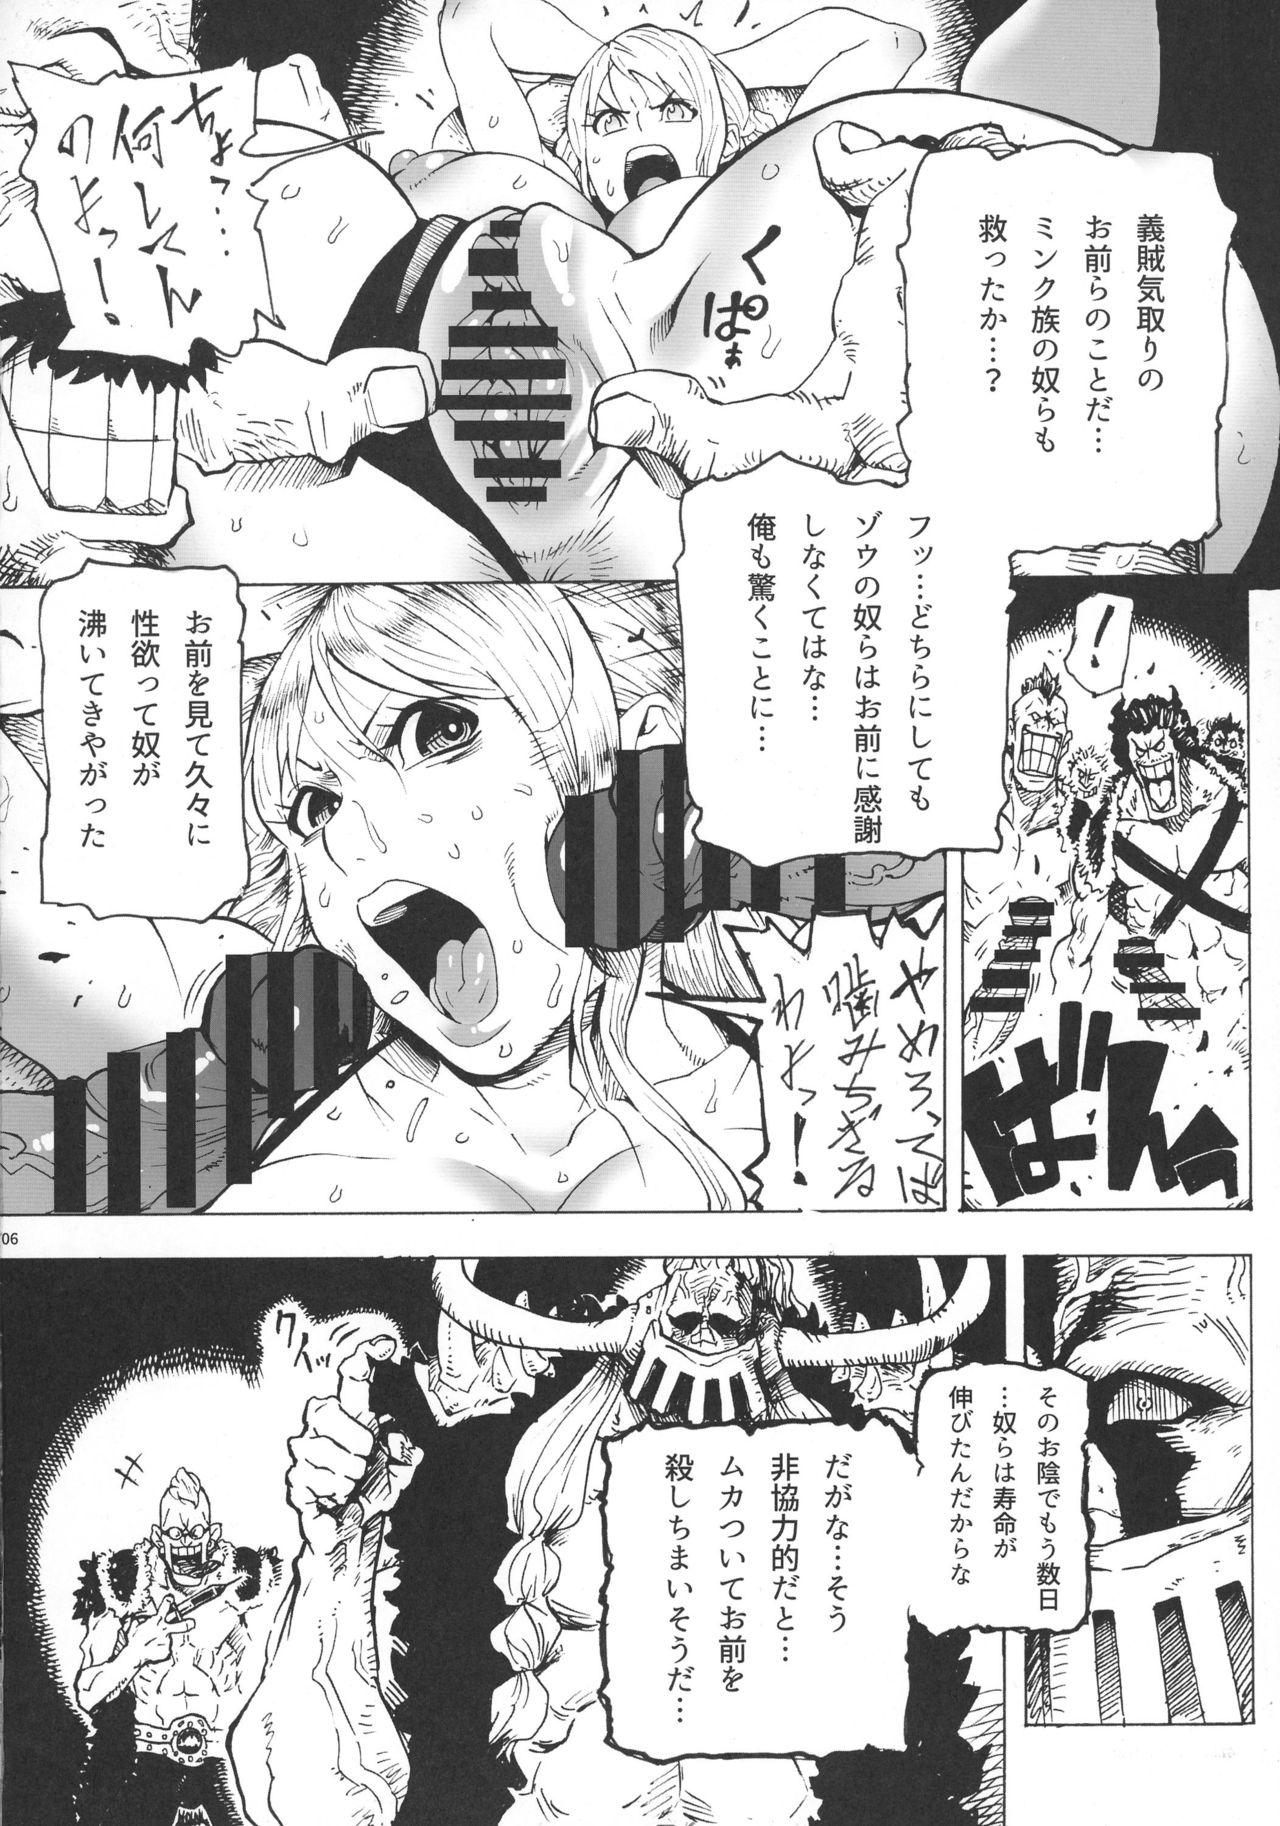 Amateurs P.O.M Another Episode "J.A.C.K" - One piece Real - Page 8